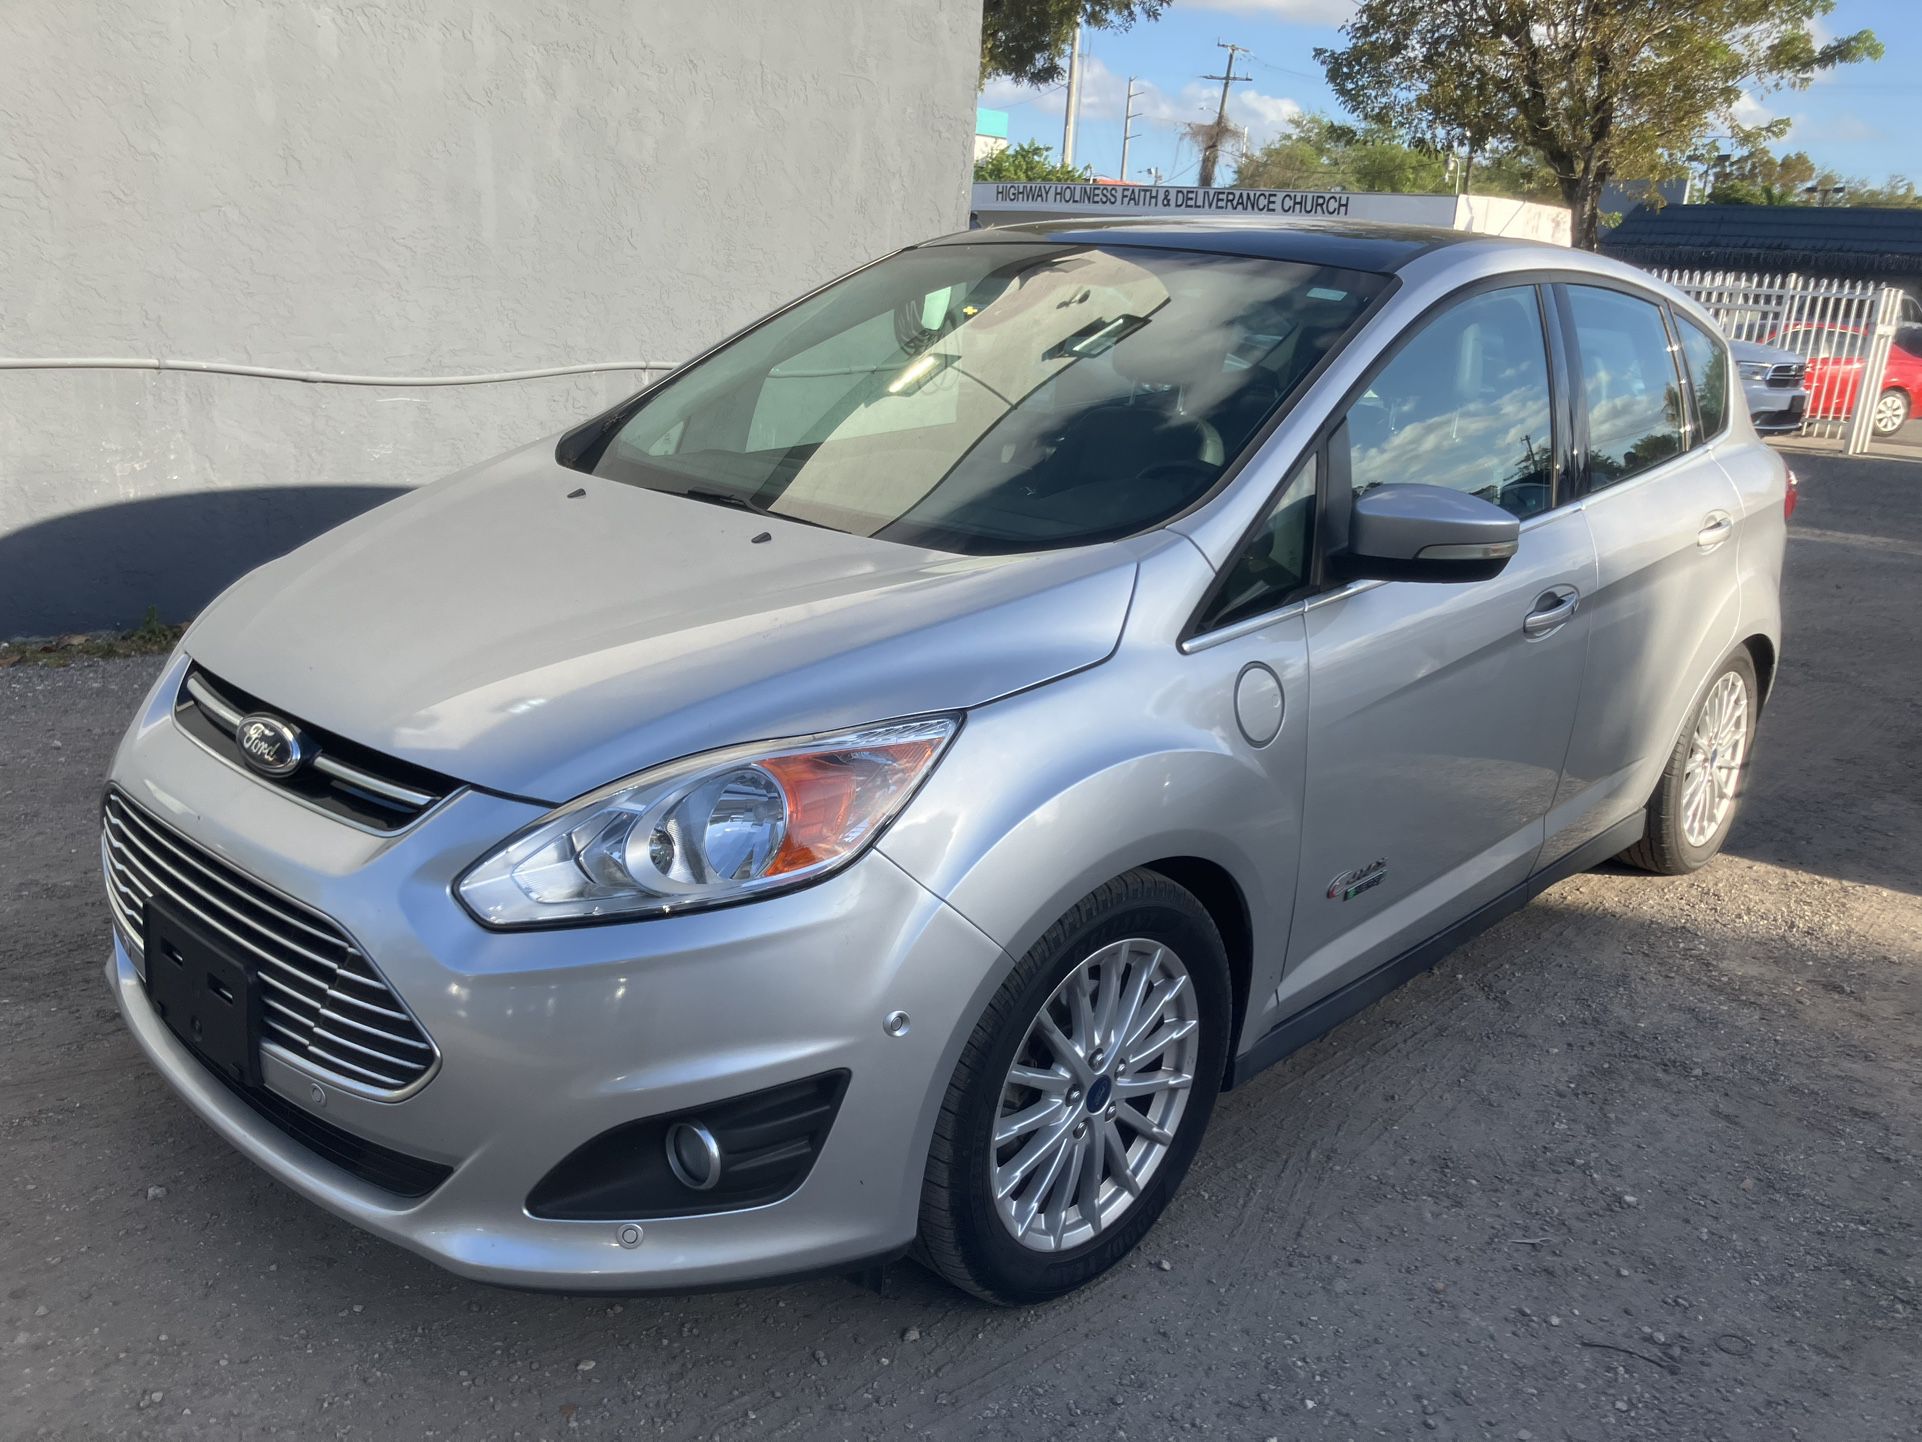 2013 Ford C-max